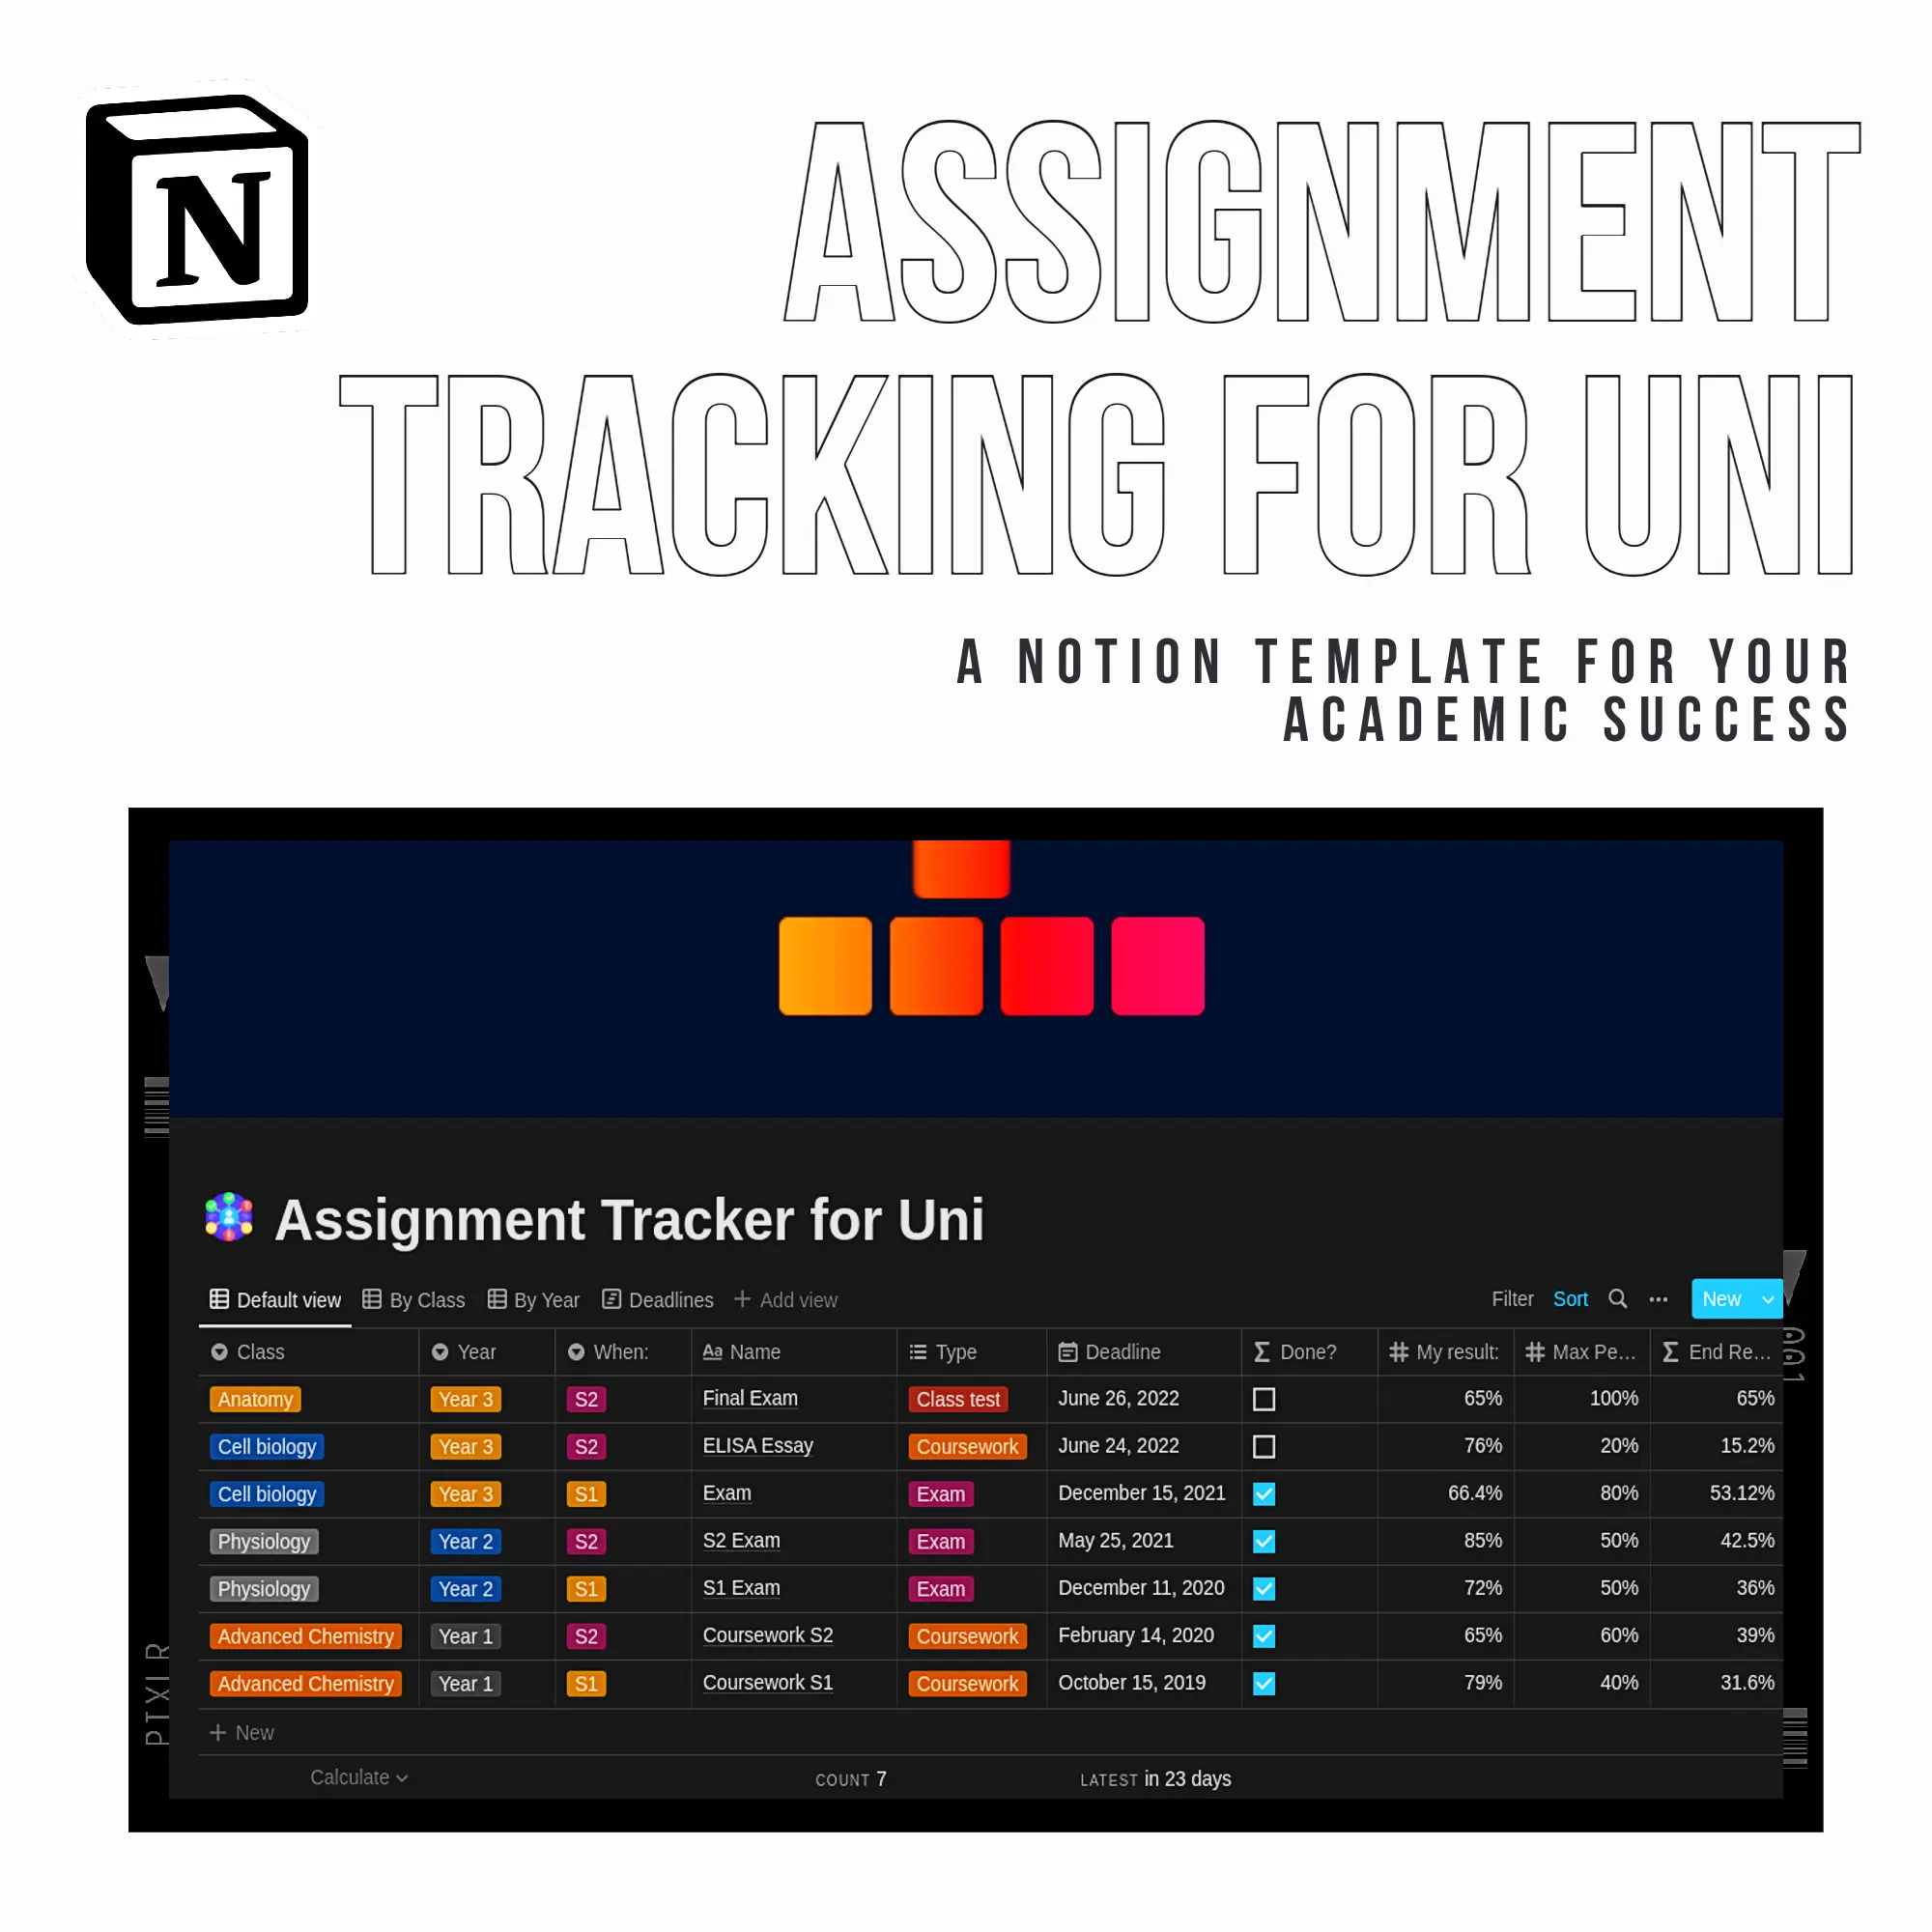 Assignment_Tracking_for_Uni_Notion_Template